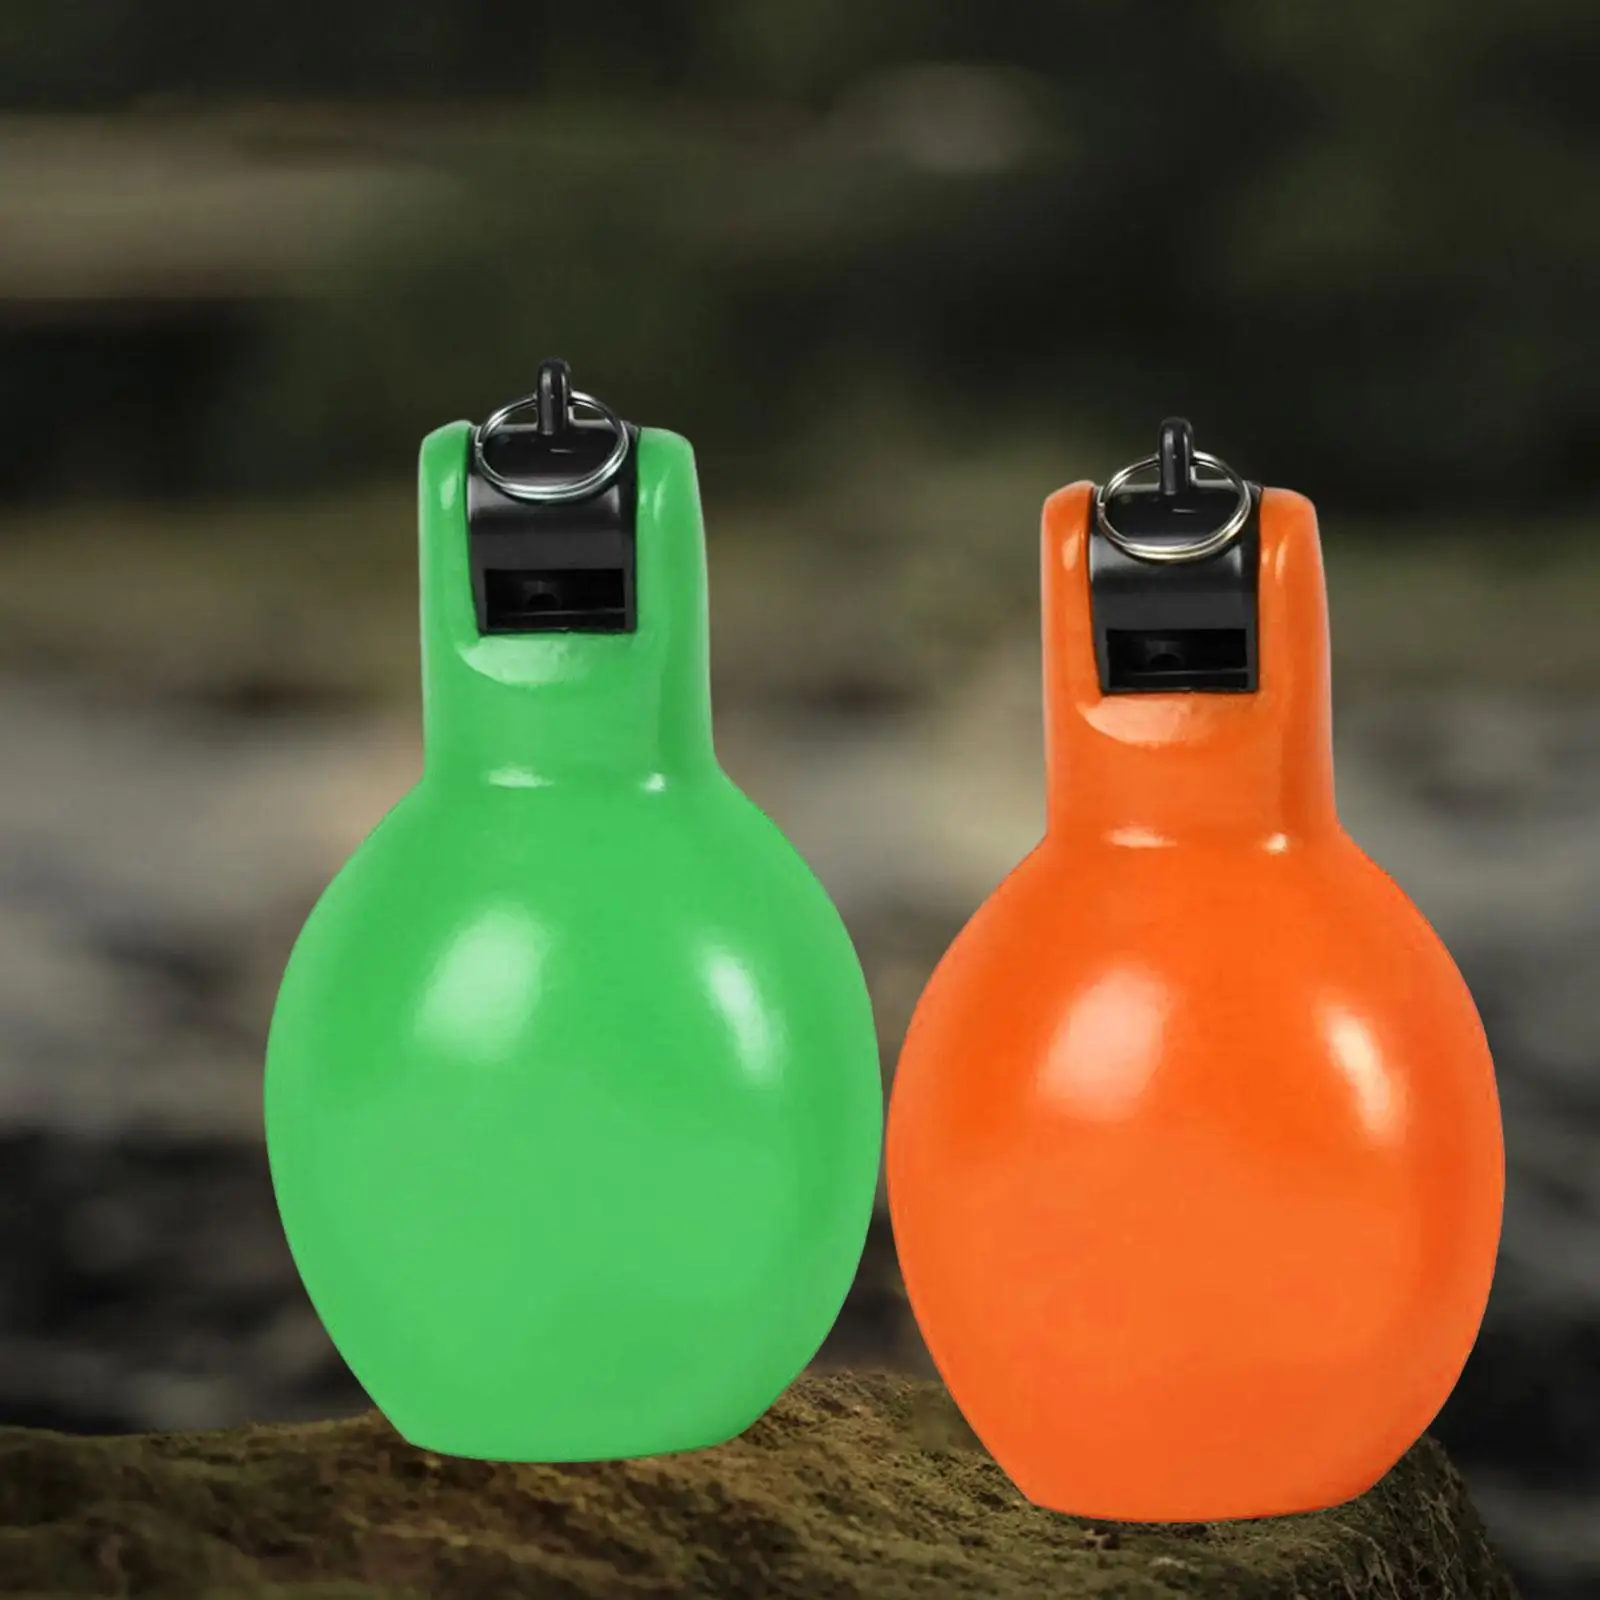 2x Hand Squeeze Whistles Loud Trainer Whistle for Basketball Hiking Training Equipment Behavior Training Football Basketball